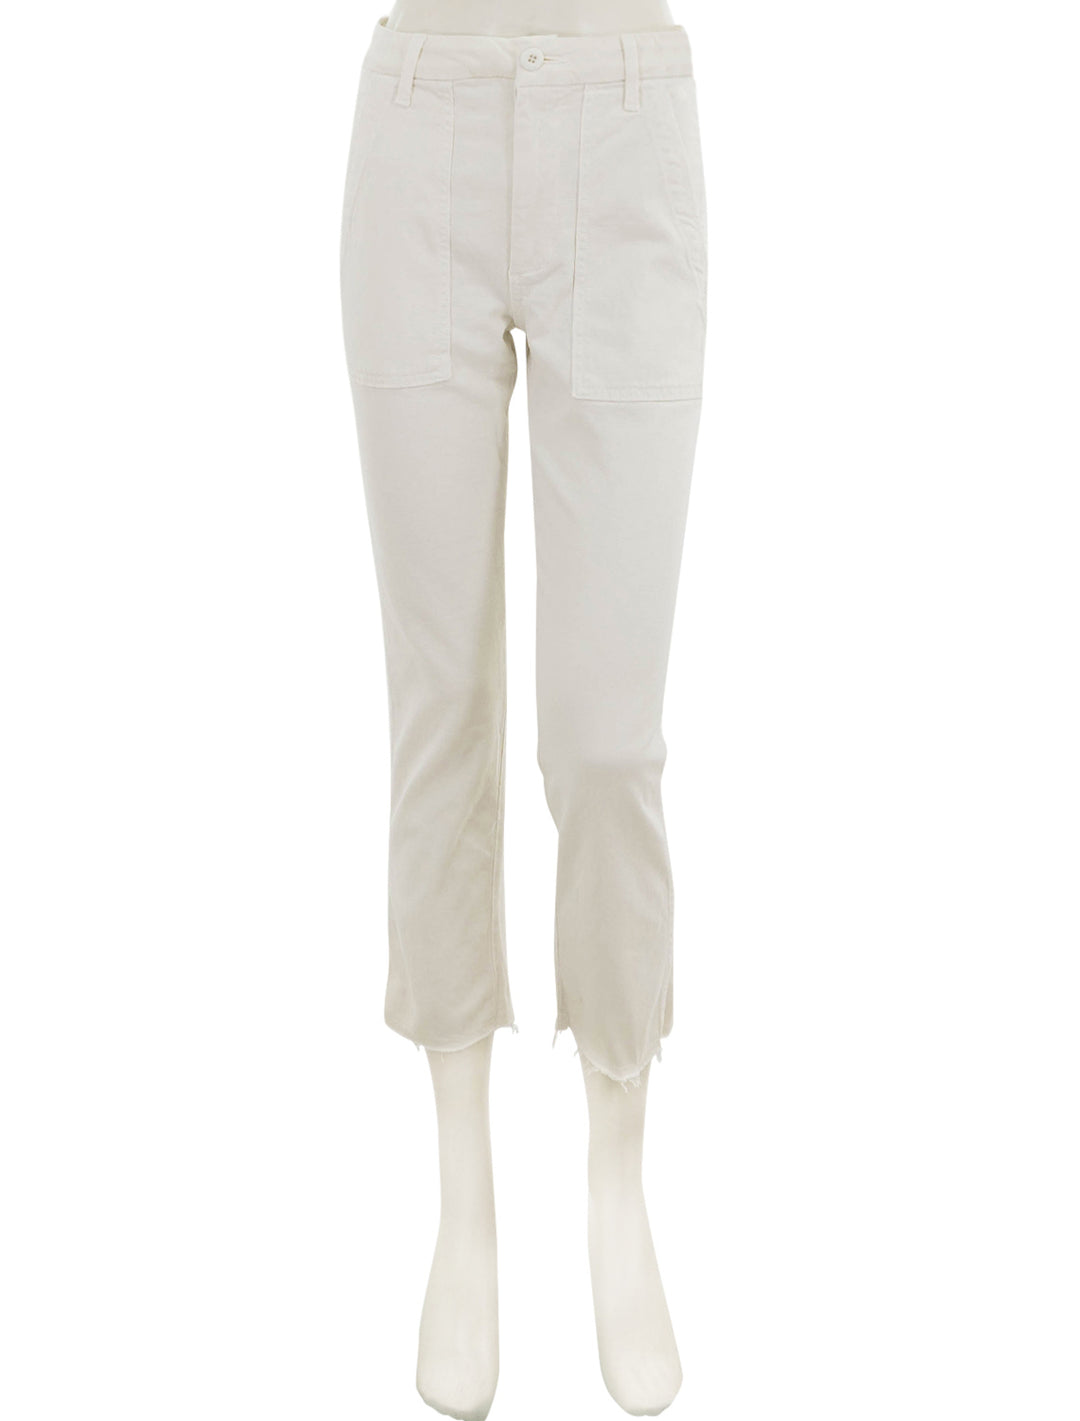 Front view of AMO's easy army trouser in white oak.